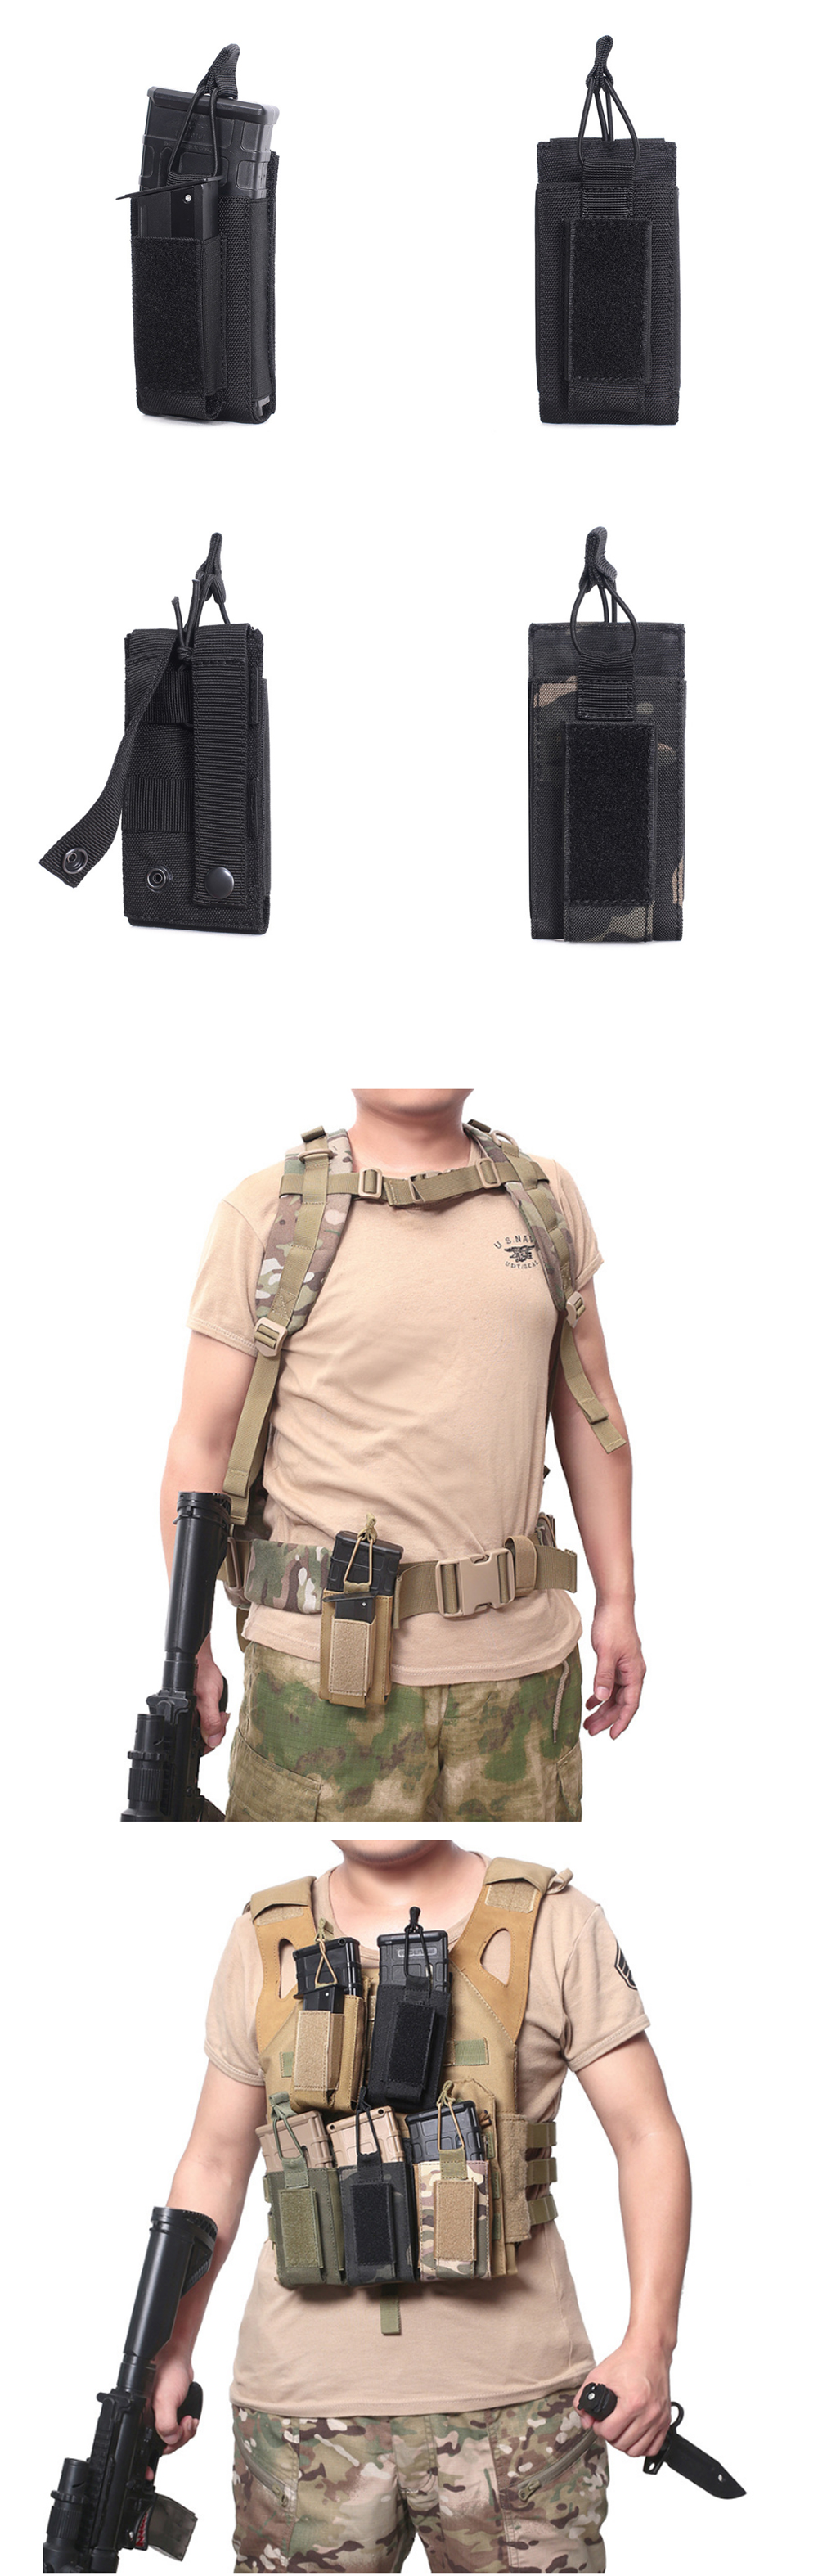 Tactical-Military-Molle-Mag-Pouch-Tactical-Magazine-Pouch-Belt-Mag-Magazine-Organizer-Bag-Hunting-Sh-1718677-2